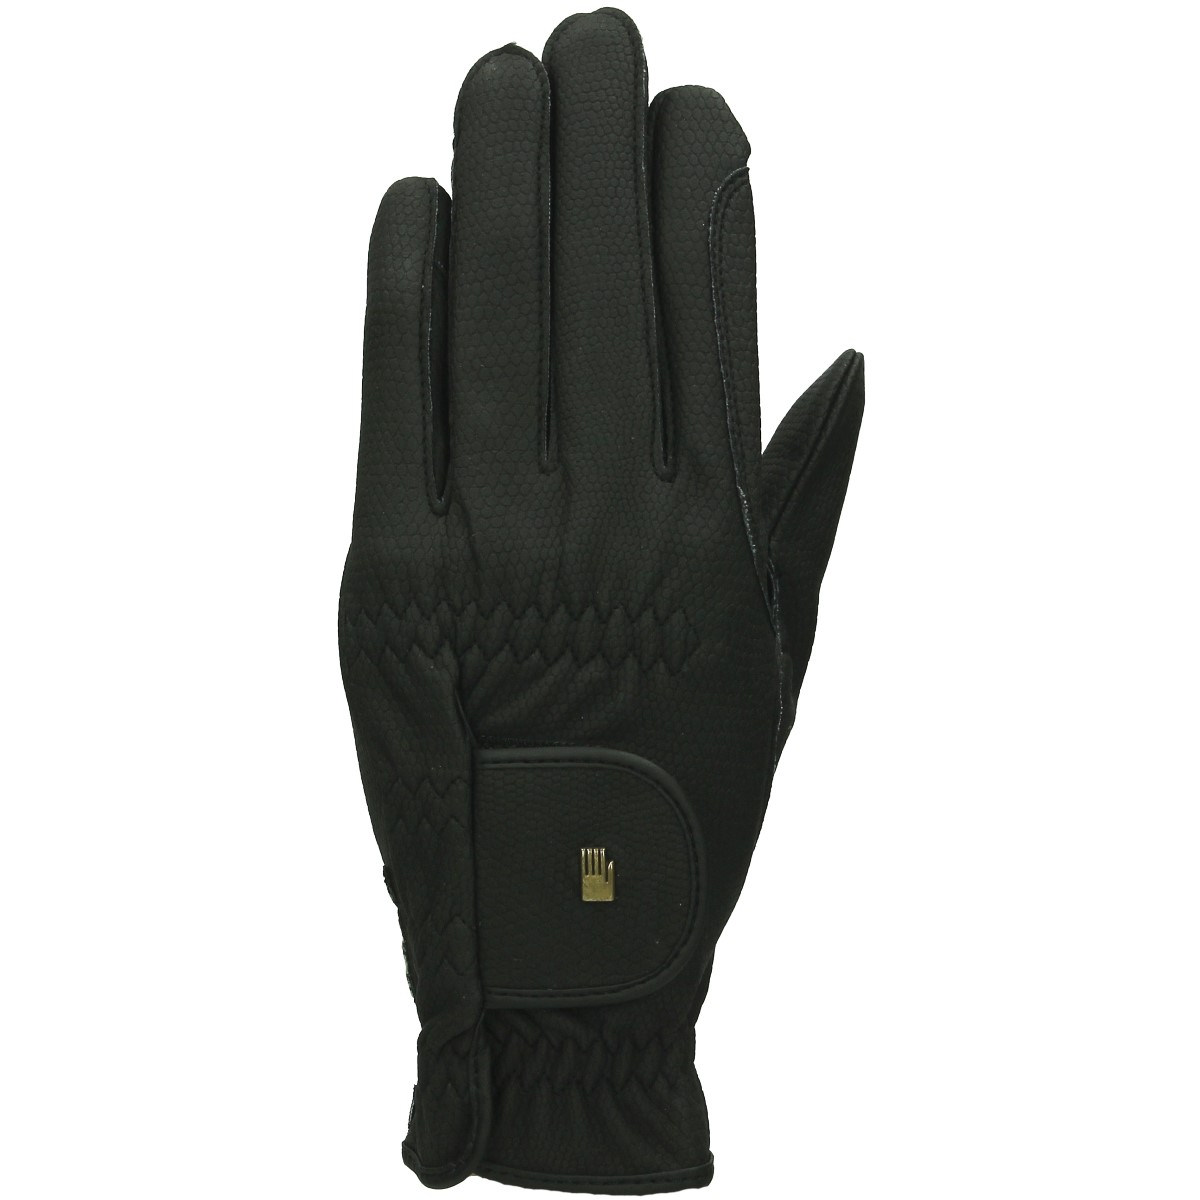 Black All Sizes Roeckl Grip Gloves Competition Glove 